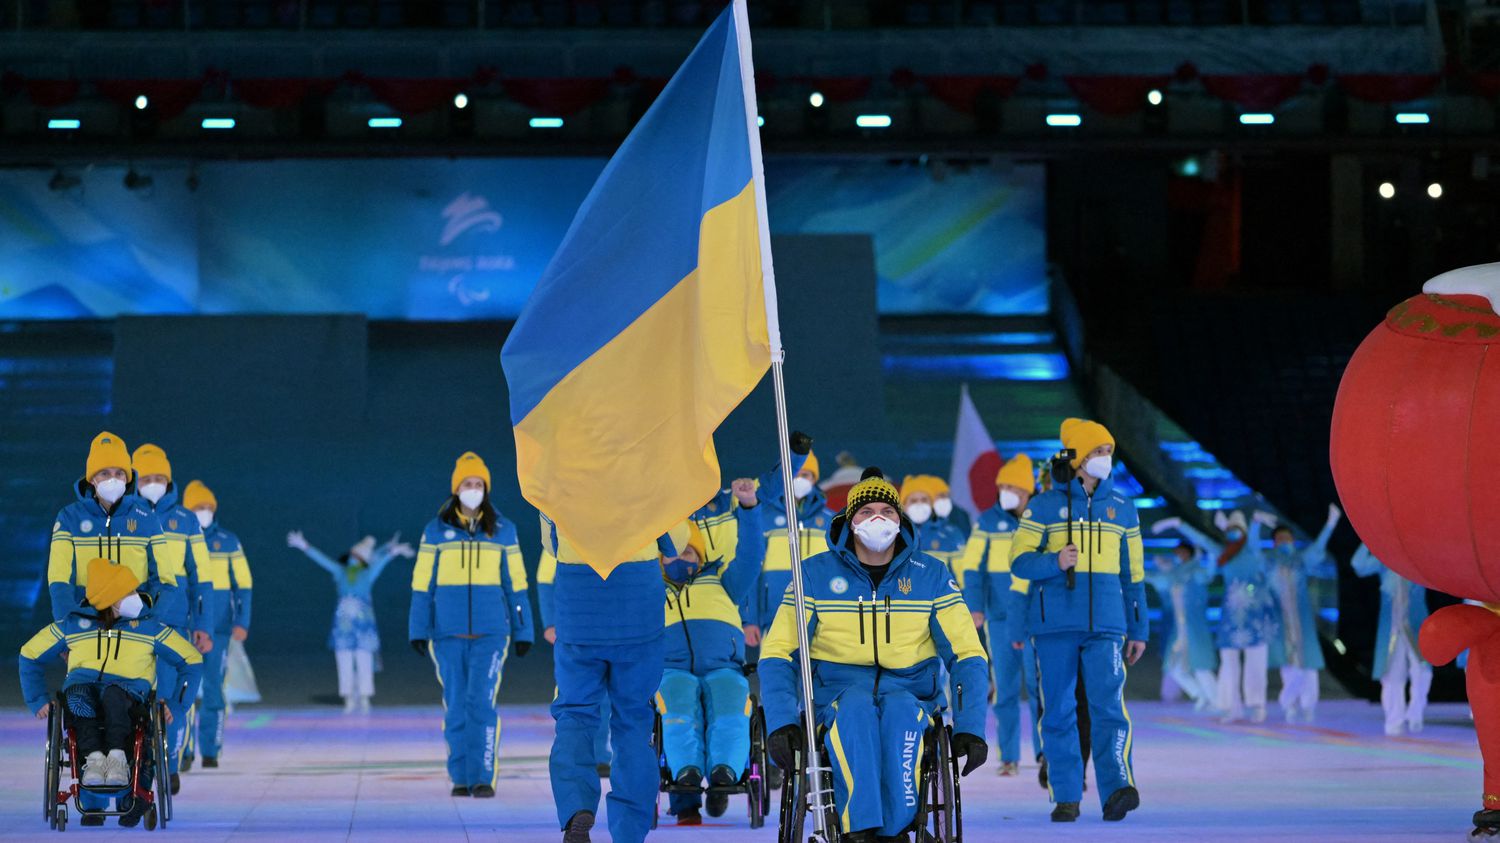 War in Ukraine: the International Olympic Committee will triple its financial aid to Ukrainian athletes
